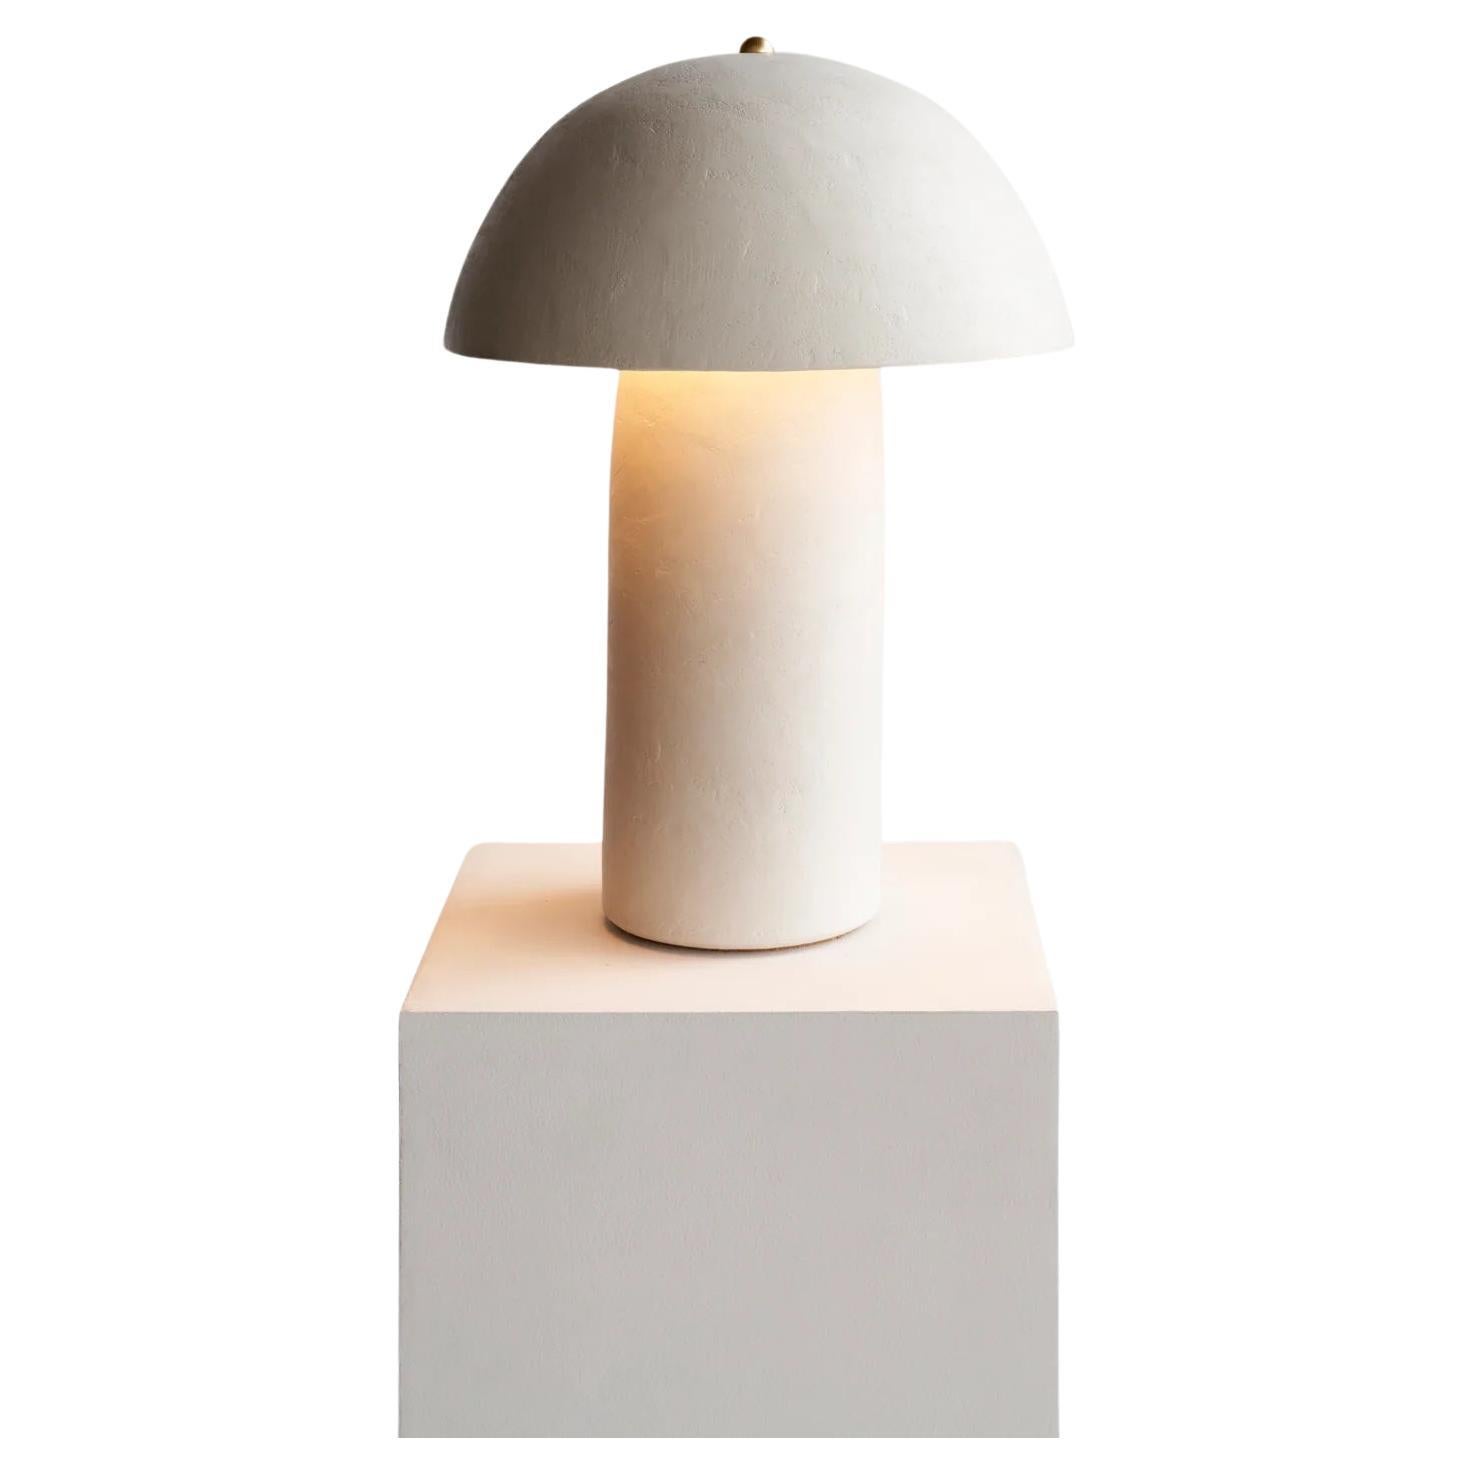 Large Tera Lamp in White Lime Plaster by Ceramicah